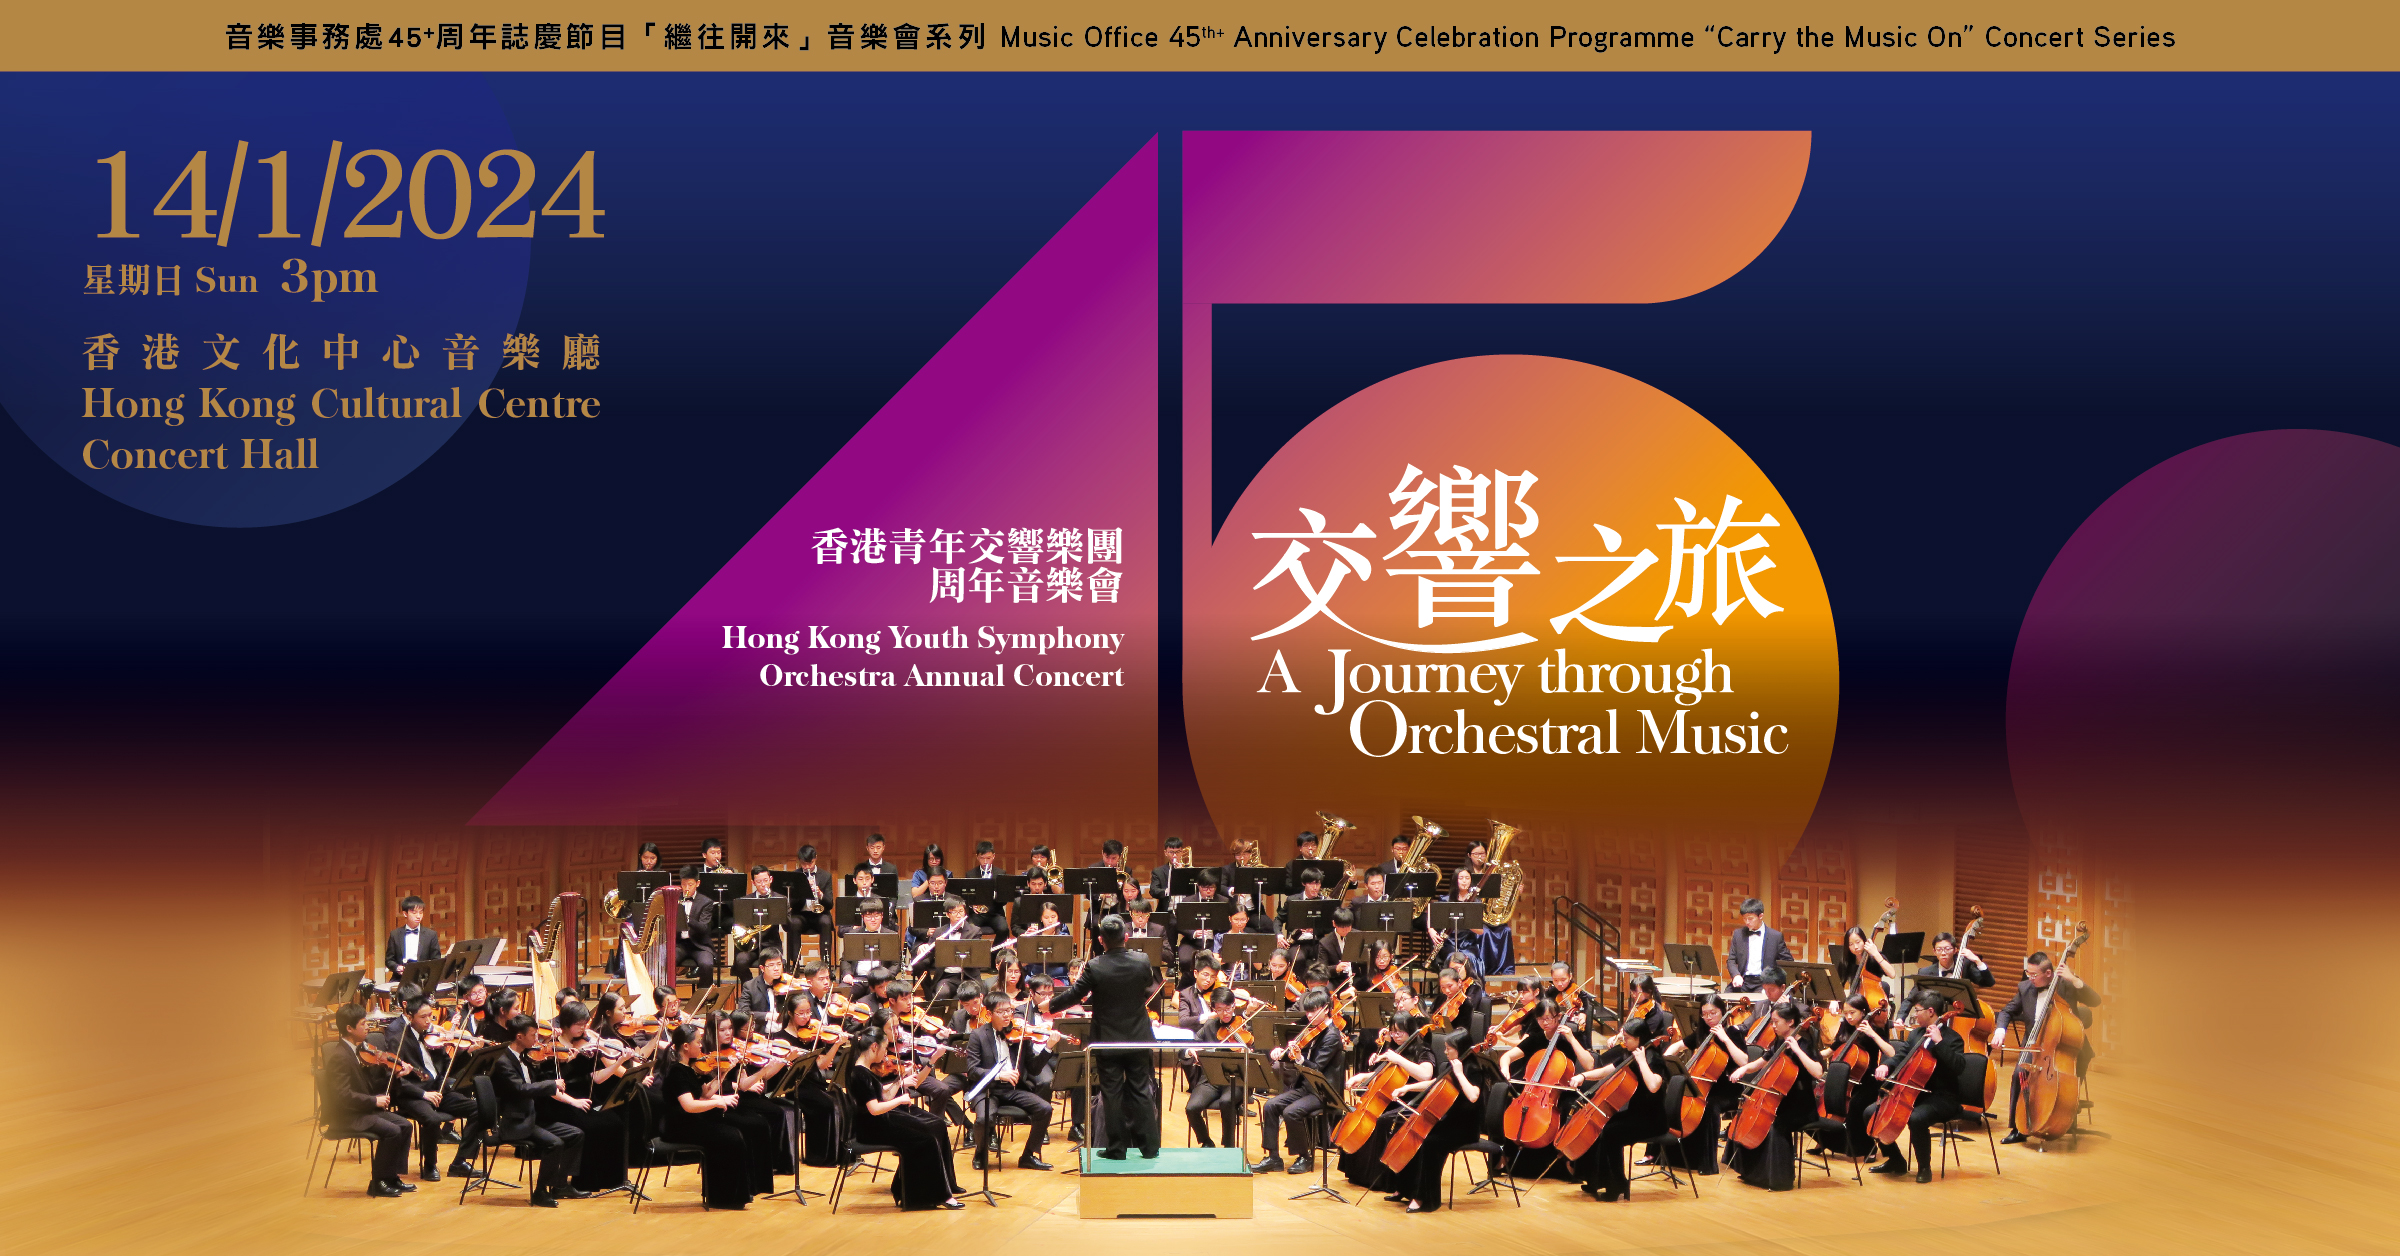 2024 Hong Kong Youth Symphony Orchestra Annual Concert  “A Journey through Orchestral Music” (Completed)